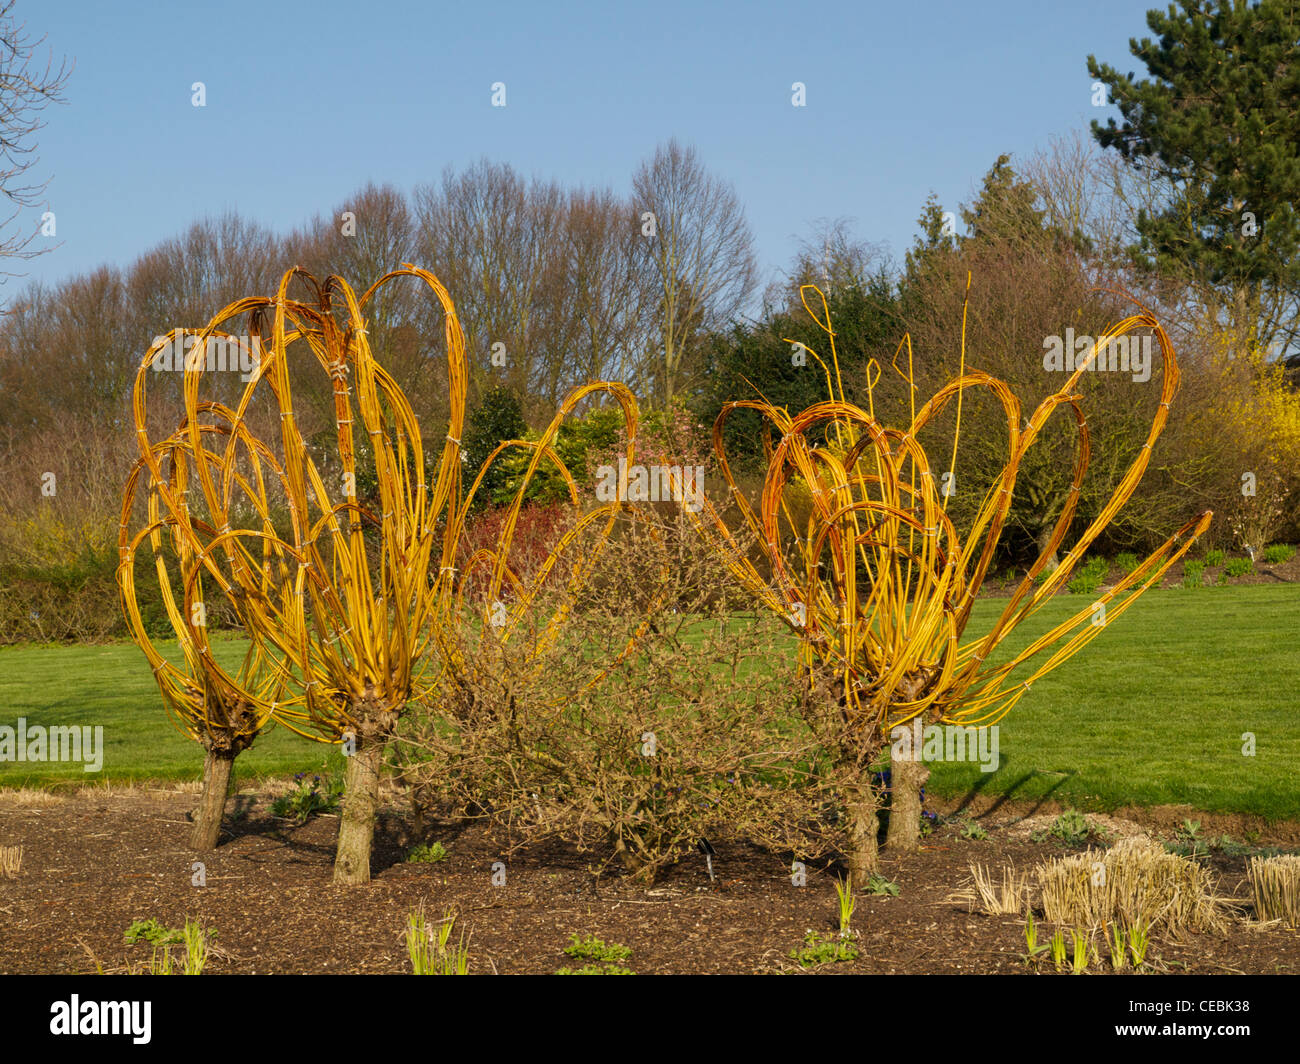 Pollarded and tied willow stems of Salix alba var. vitellina at RHS Hyde Hall Stock Photo